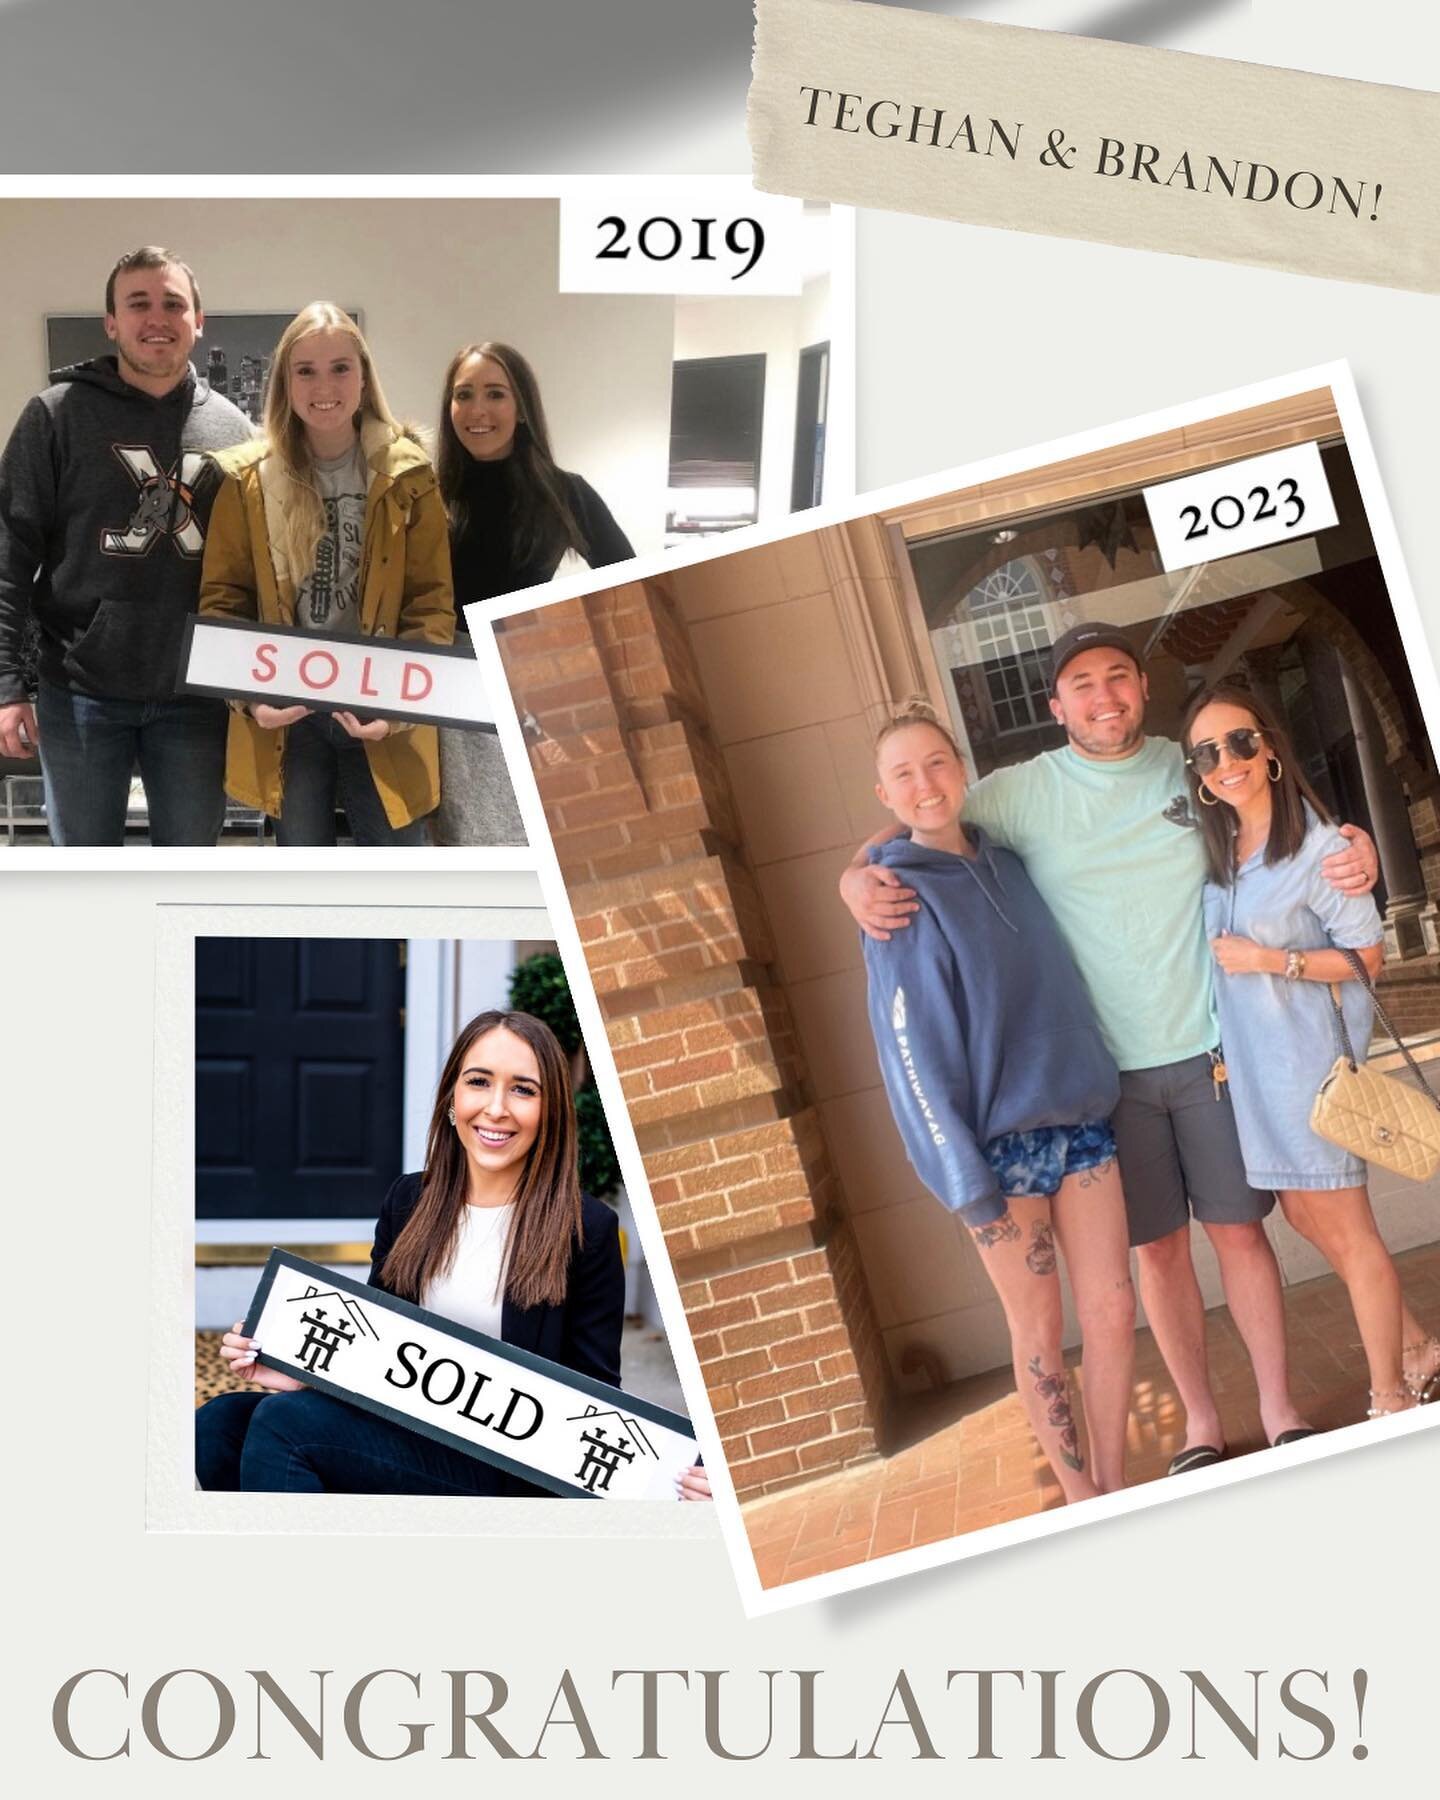 🤍Congratulations🤍

To my wonderful clients Teghan and Brandon on a successful sale of their beautiful home here in KC. I had the honor of helping them purchase the home in 2019 when they were moving here for Teghan to attend Law School! ➡️Now fast 